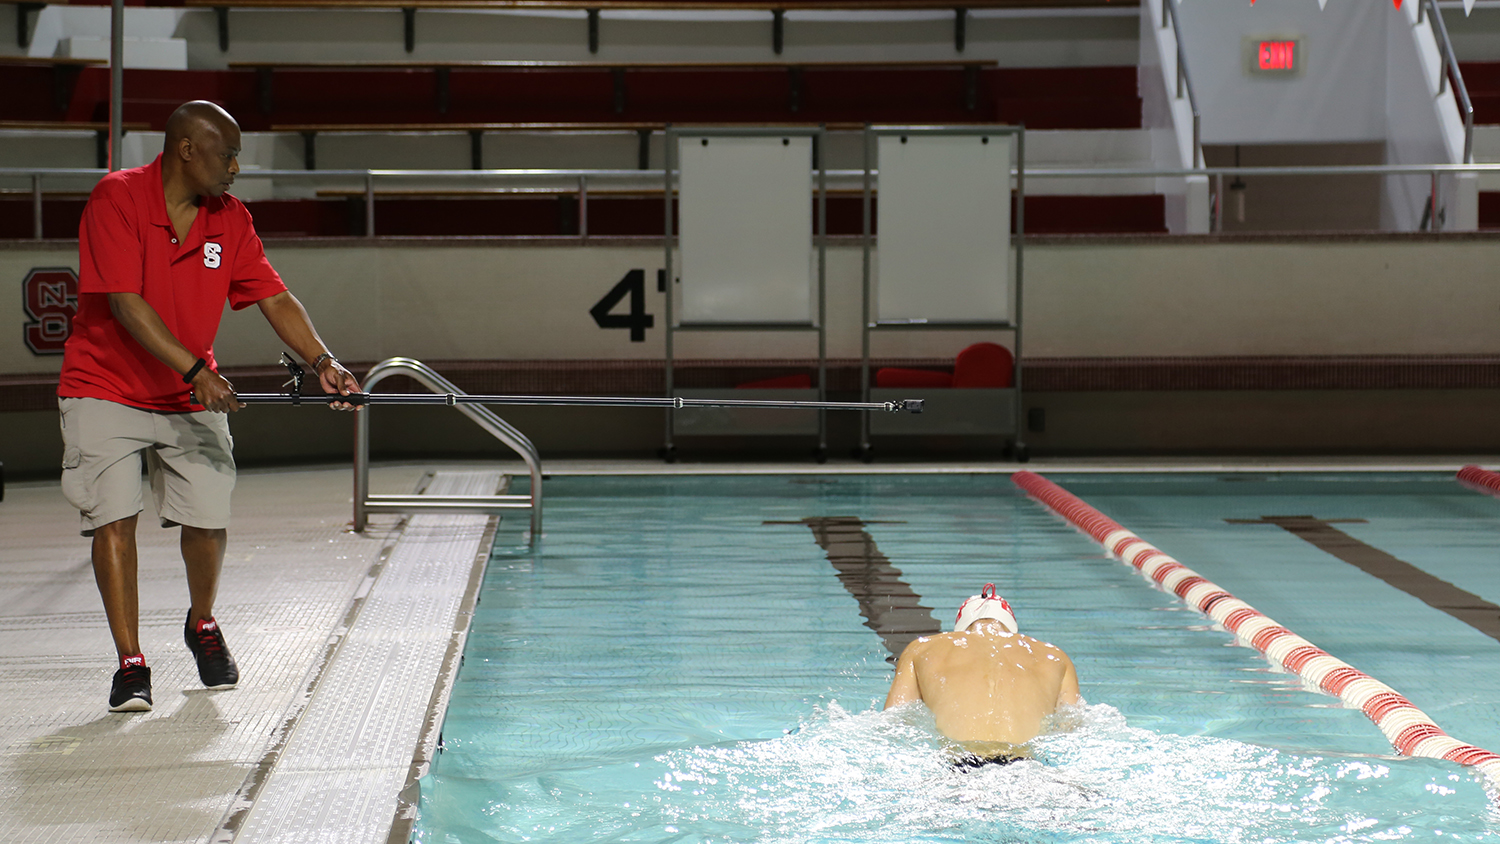 Robinson holds an extended camera to record a swimmer from above in the Aquatic Center.